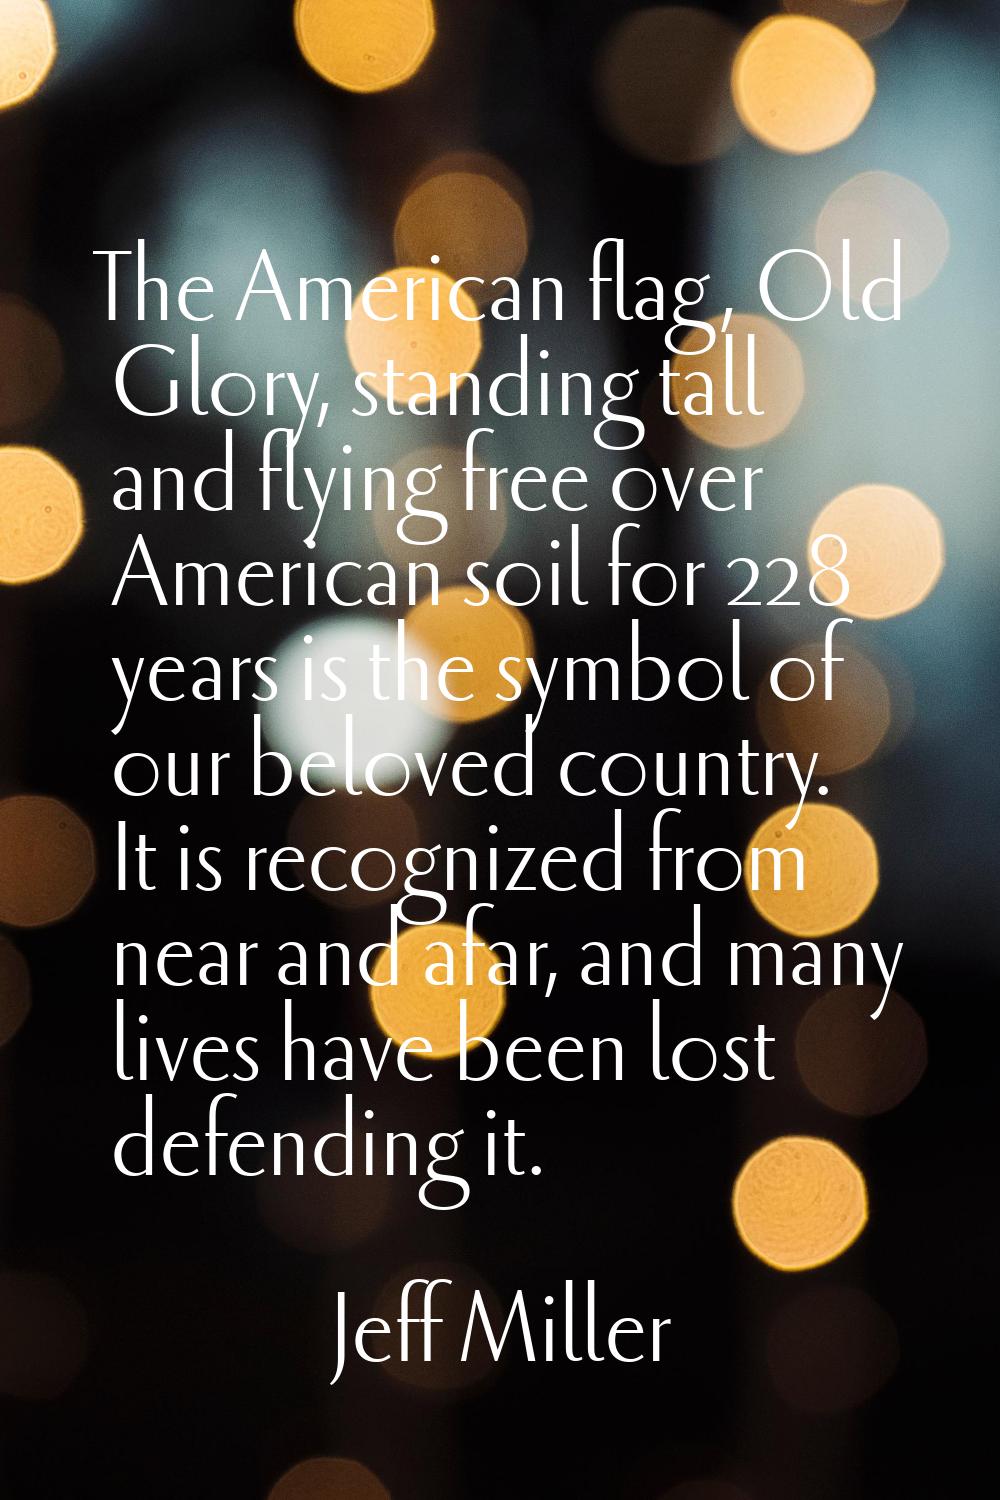 The American flag, Old Glory, standing tall and flying free over American soil for 228 years is the